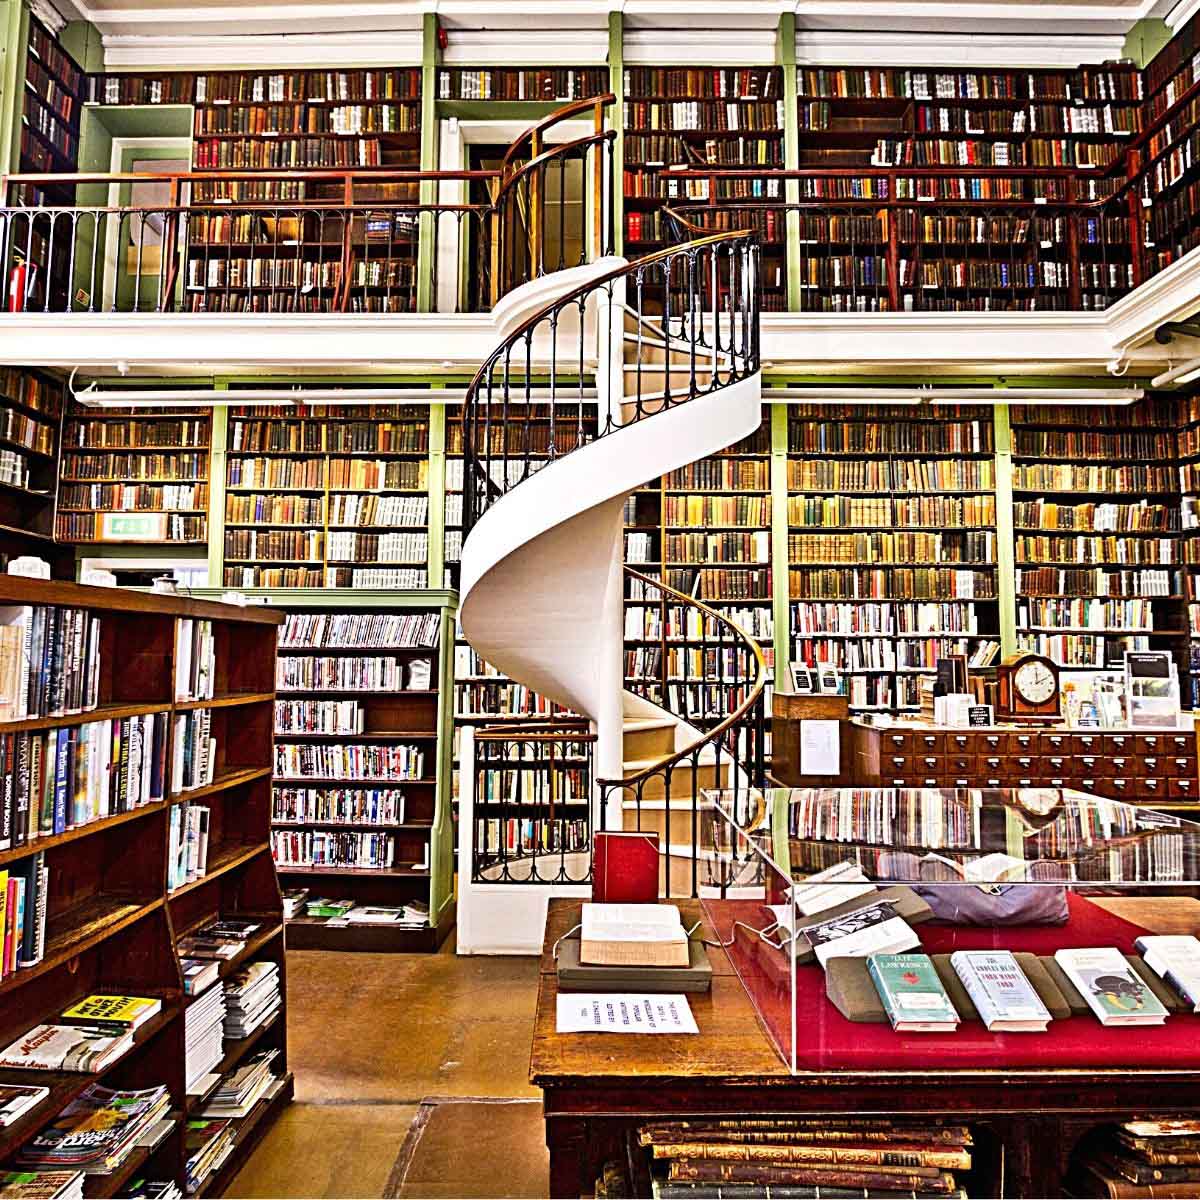 A large library filled with shelves of books, with a two-story spiral staircase in the center of the room.